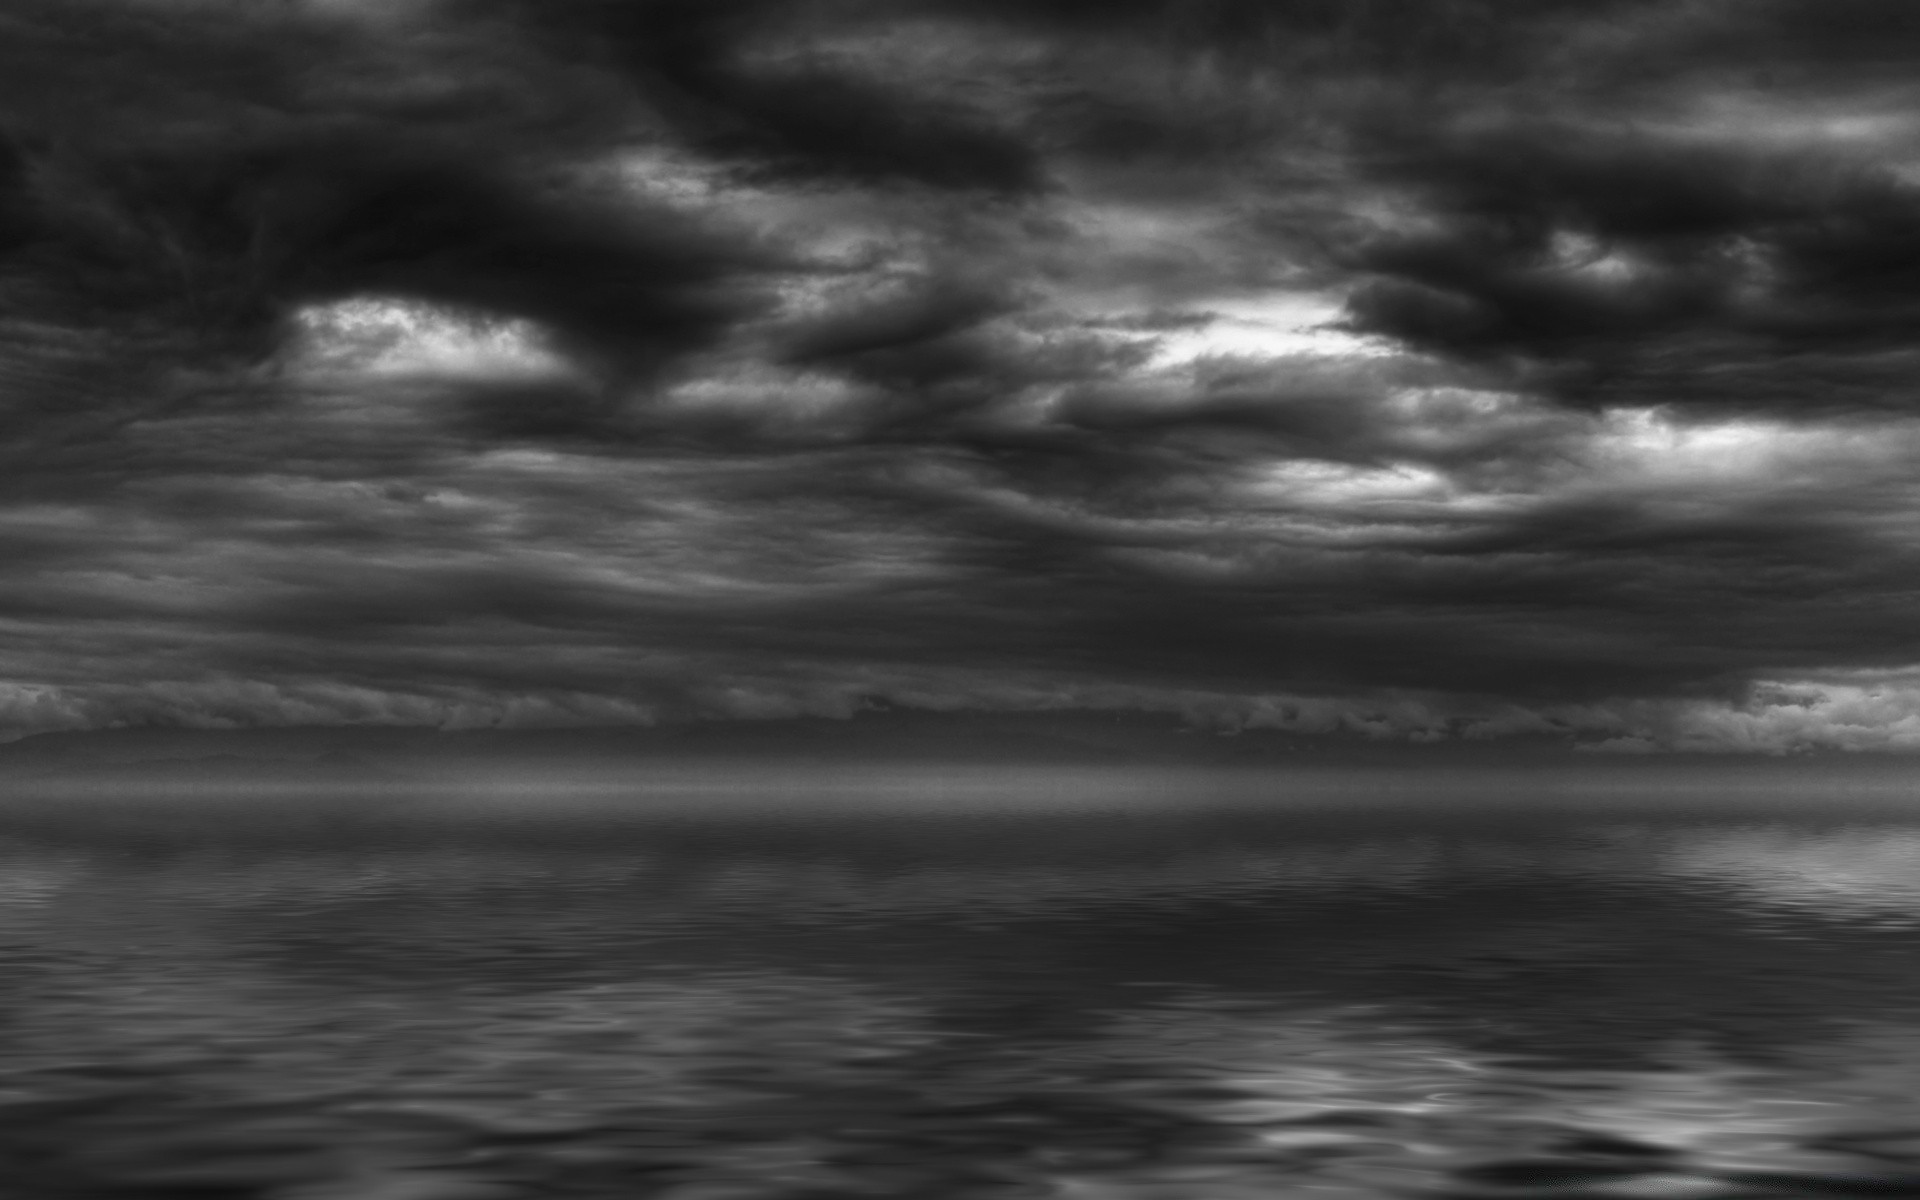 black and white storm dark rain nature sky monochrome sunset water outdoors landscape weather abstract